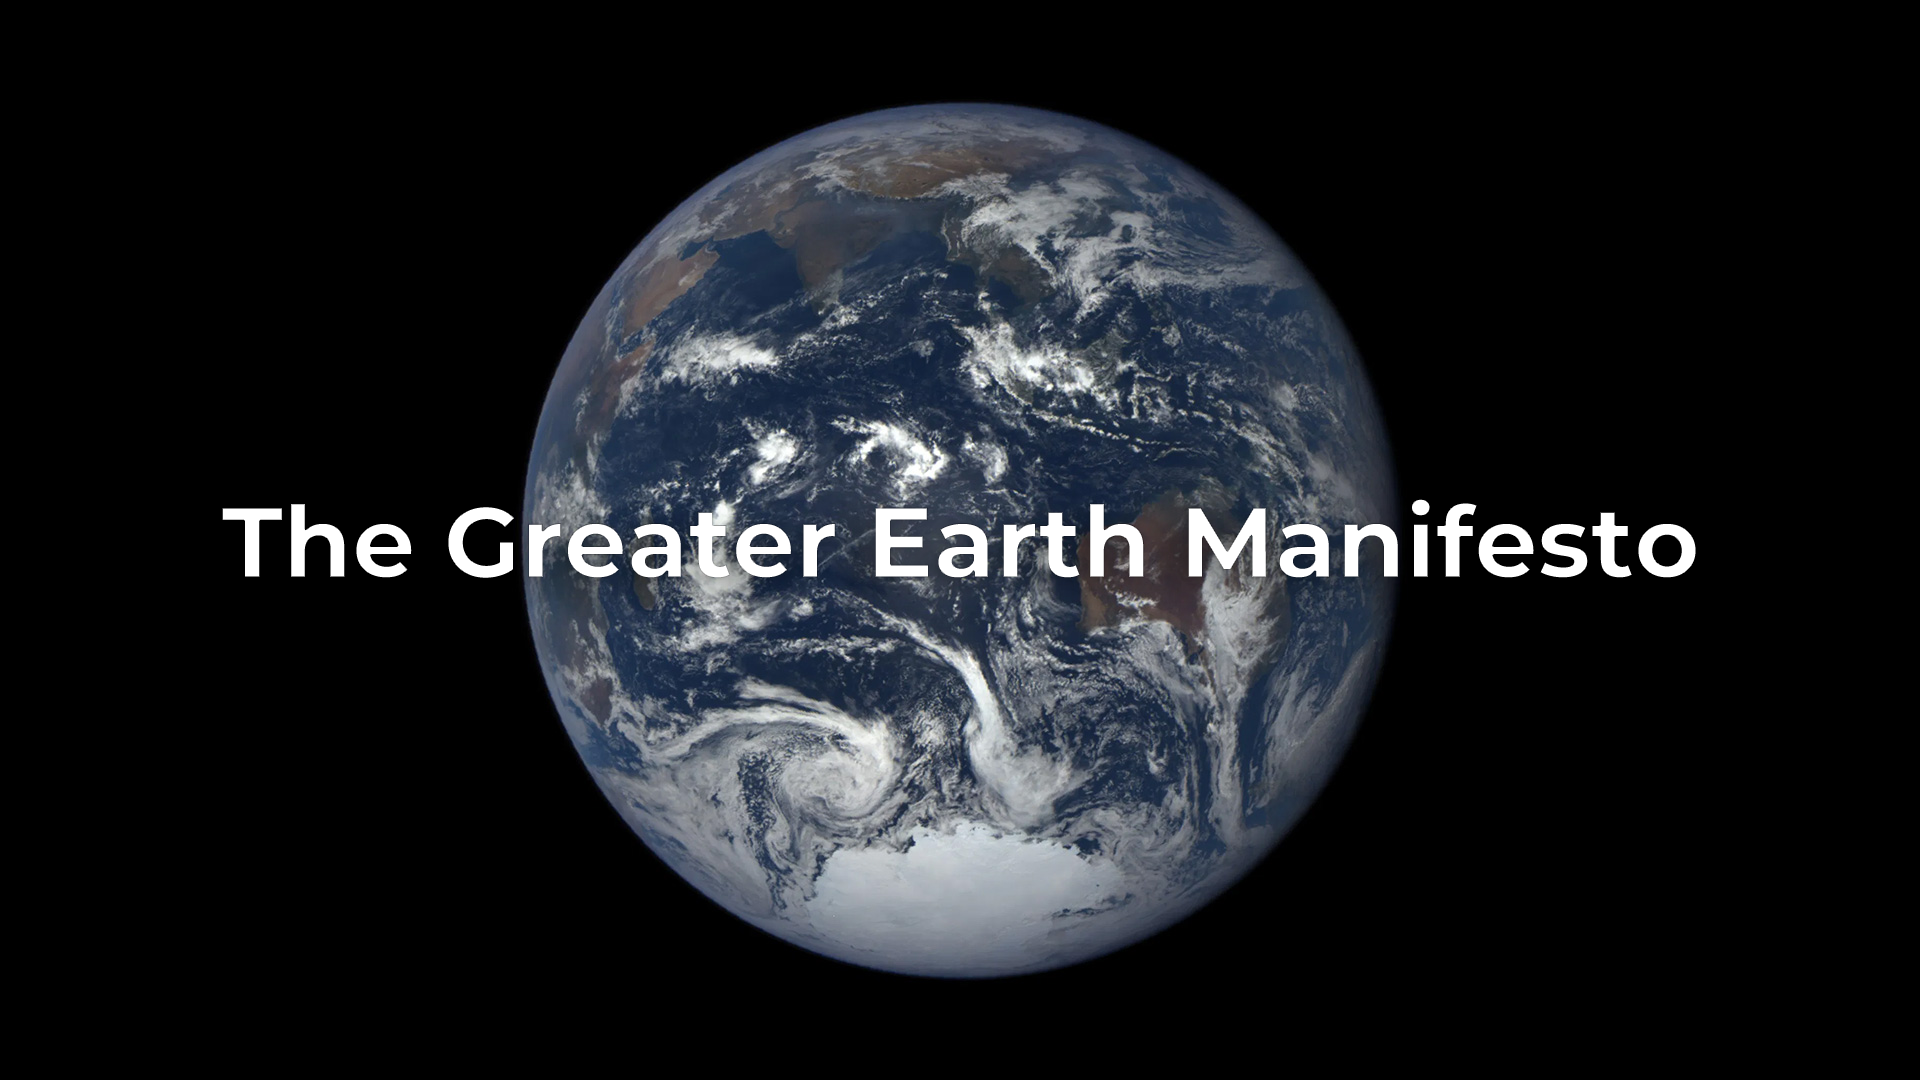 The Greater Earth Manifesto